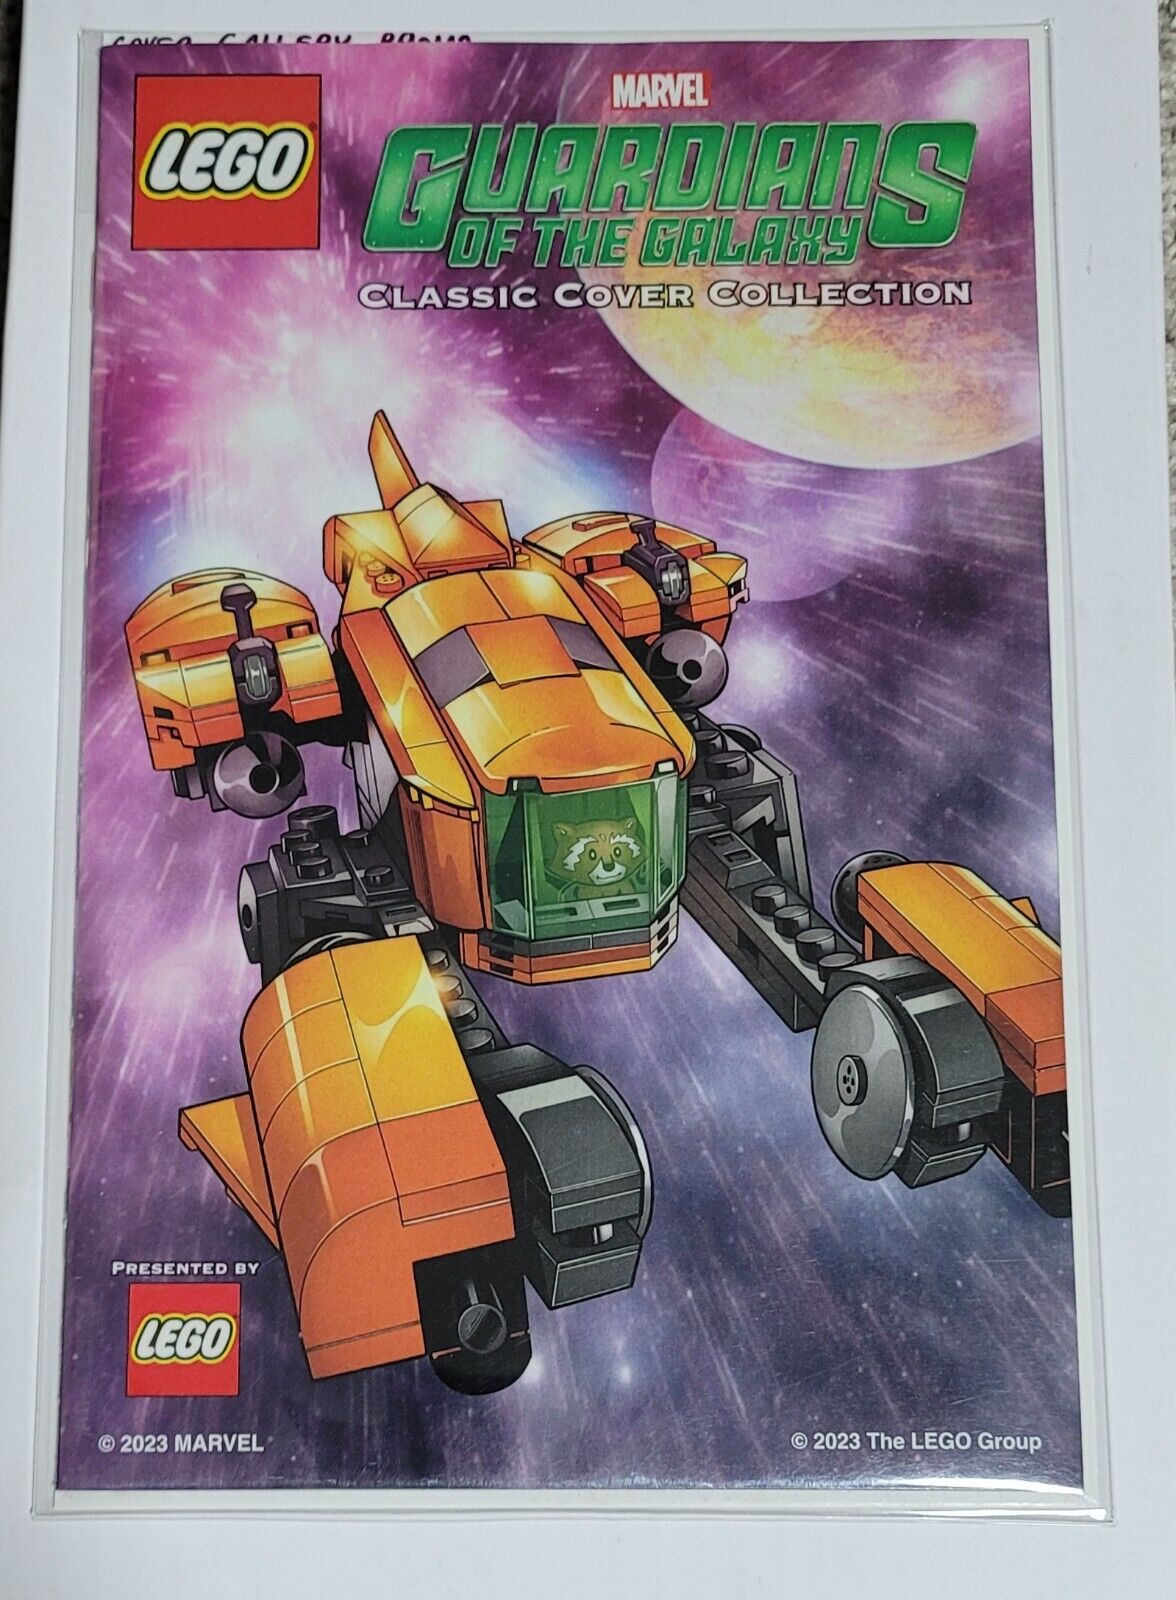 Guardians of the Galaxy Classic Cover Collection - 2023 Marvel LEGO Promo